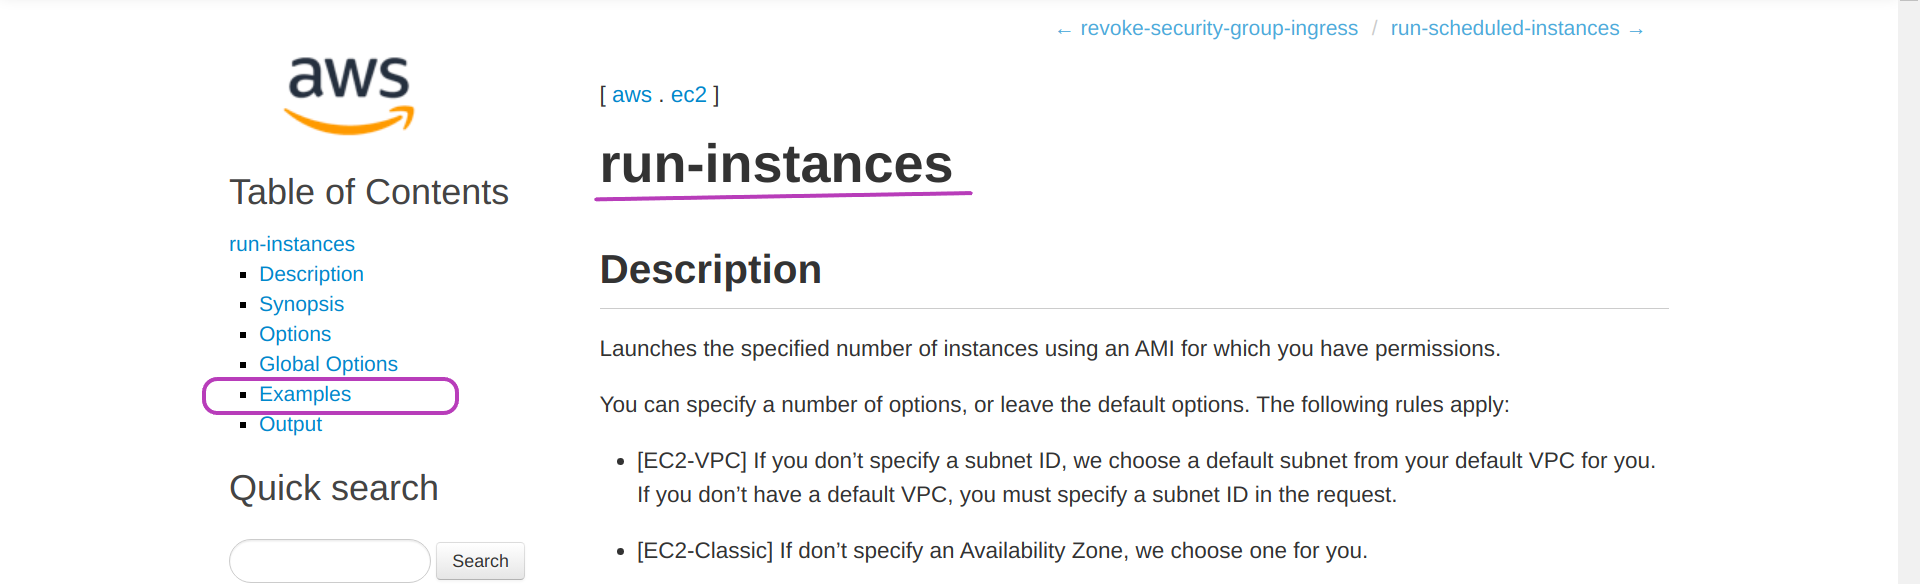 Screenshot of "AWS CLI run-instances" page in a browser, showing the option "Examples" circled.